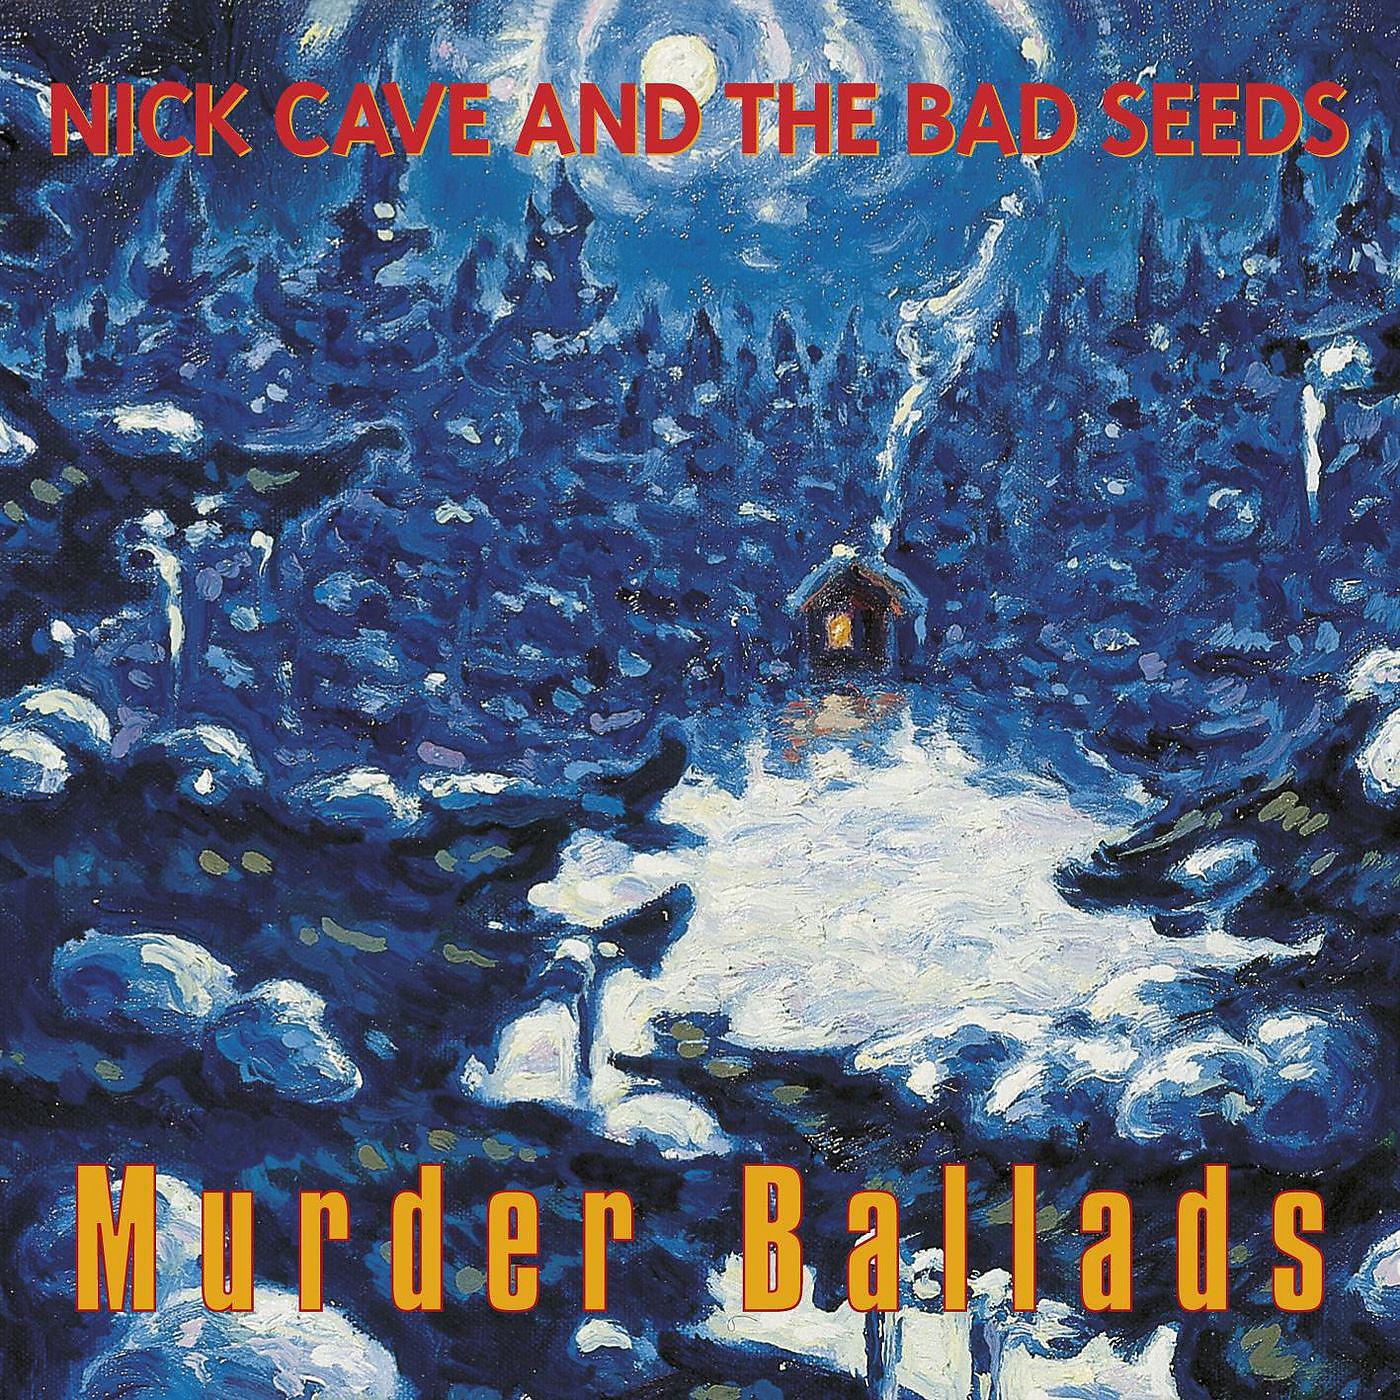 Nick Cave & The Bad Seeds, Kylie Minogue - Where the Wild Roses Grow (2011 - Remaster)